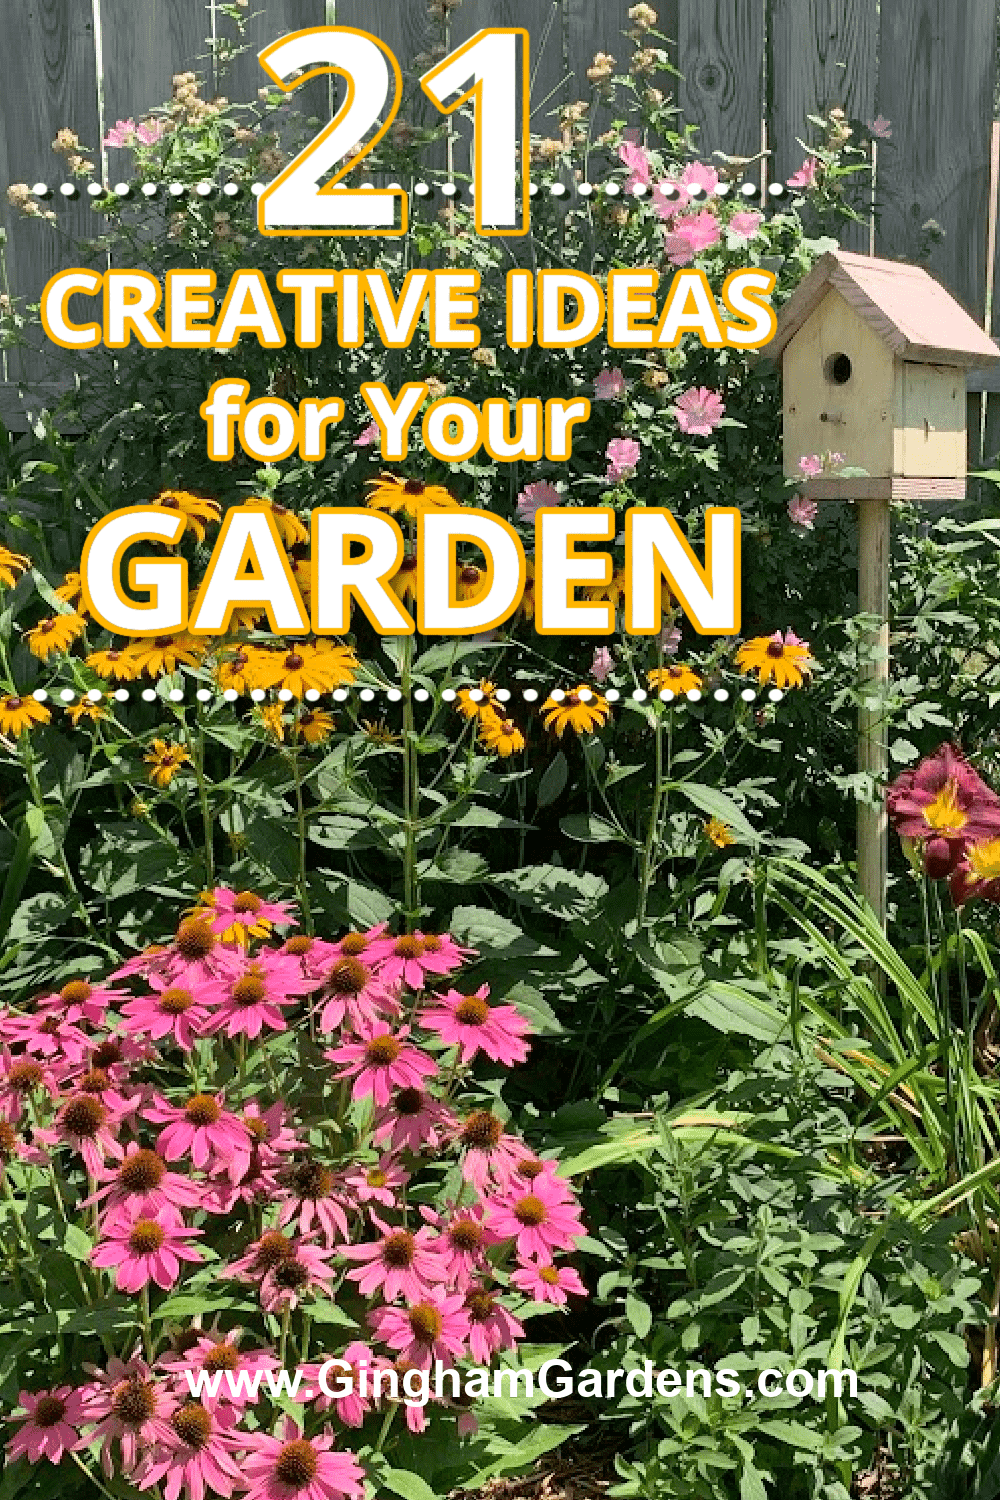 Image of a flower garden with text overlay - Creative Ideas for Your Garden